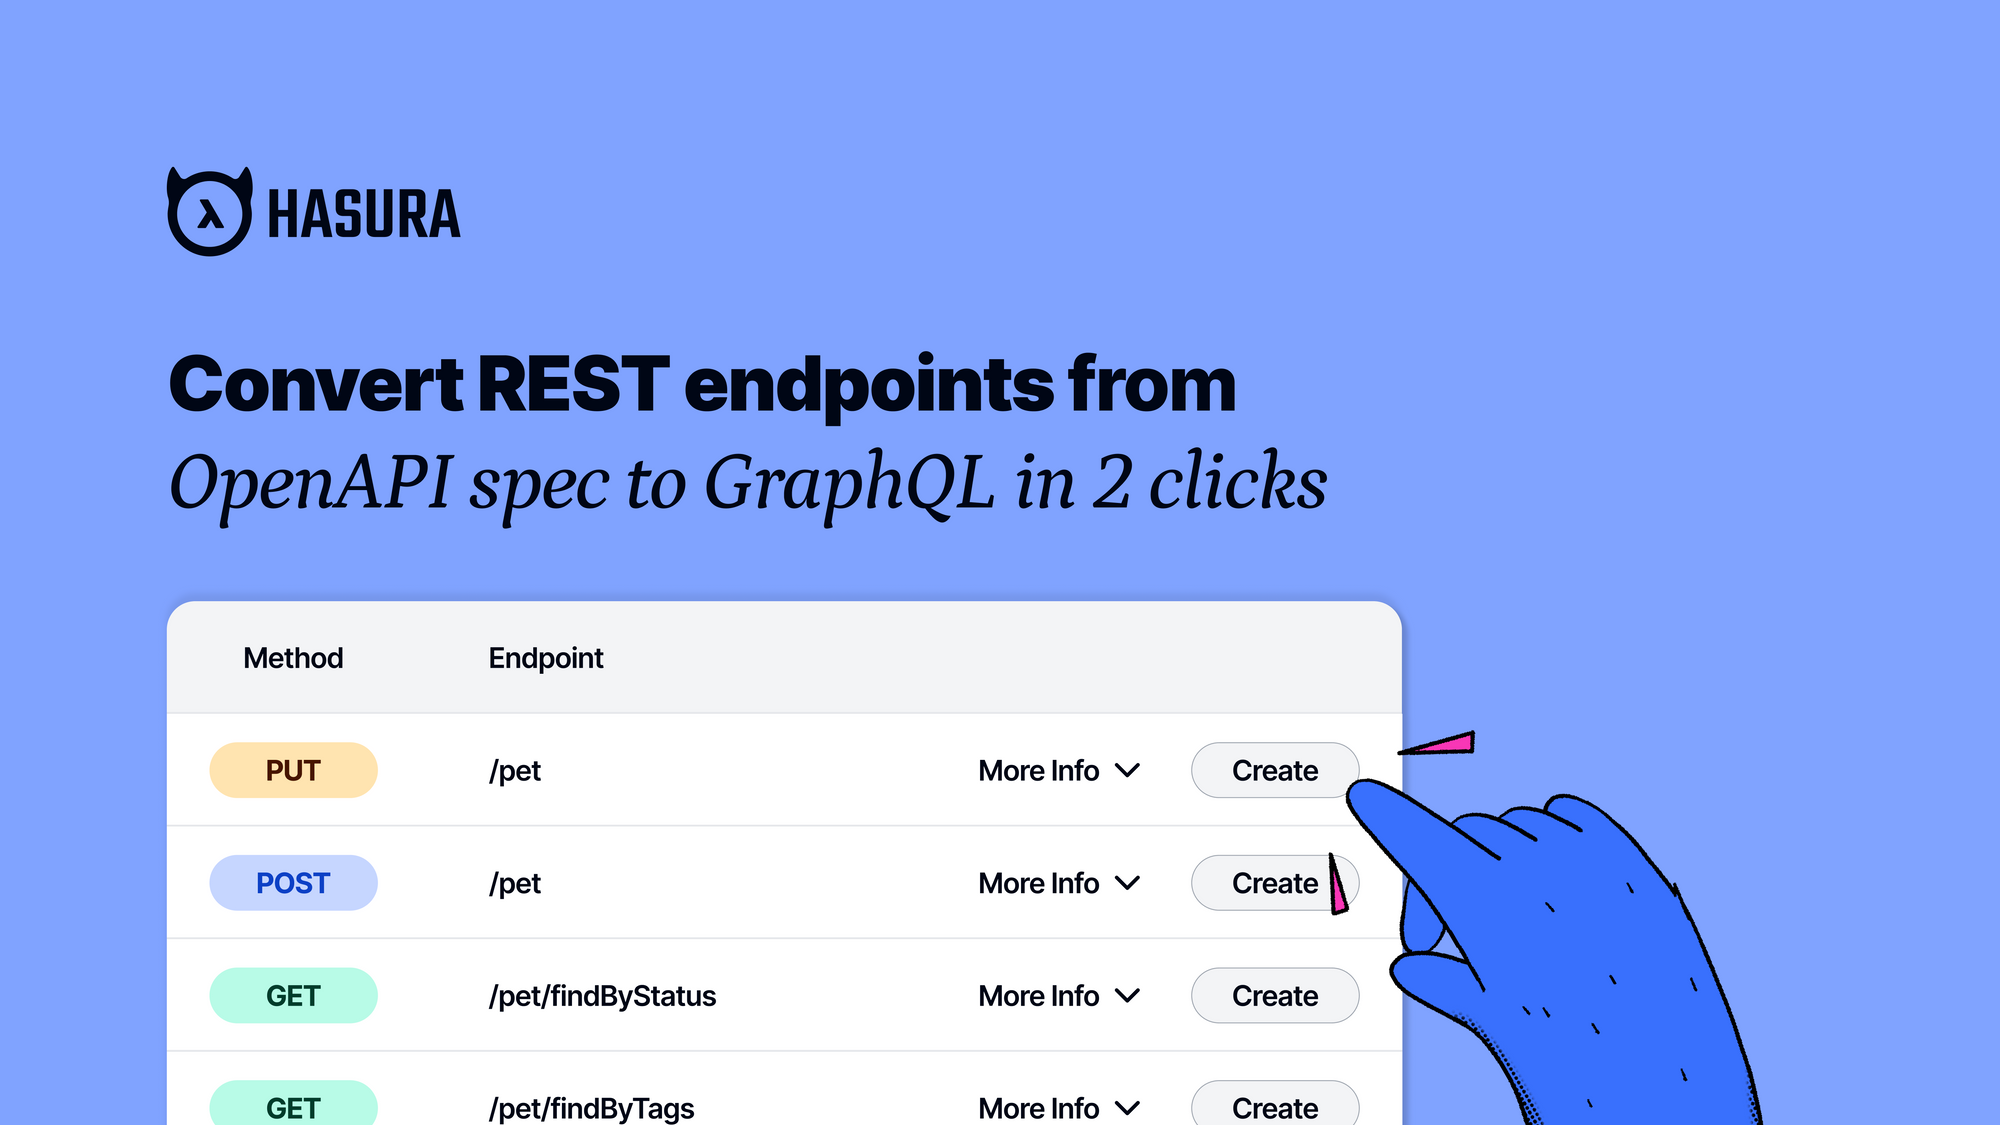 Convert REST endpoints from OpenAPI spec to GraphQL in 2 clicks